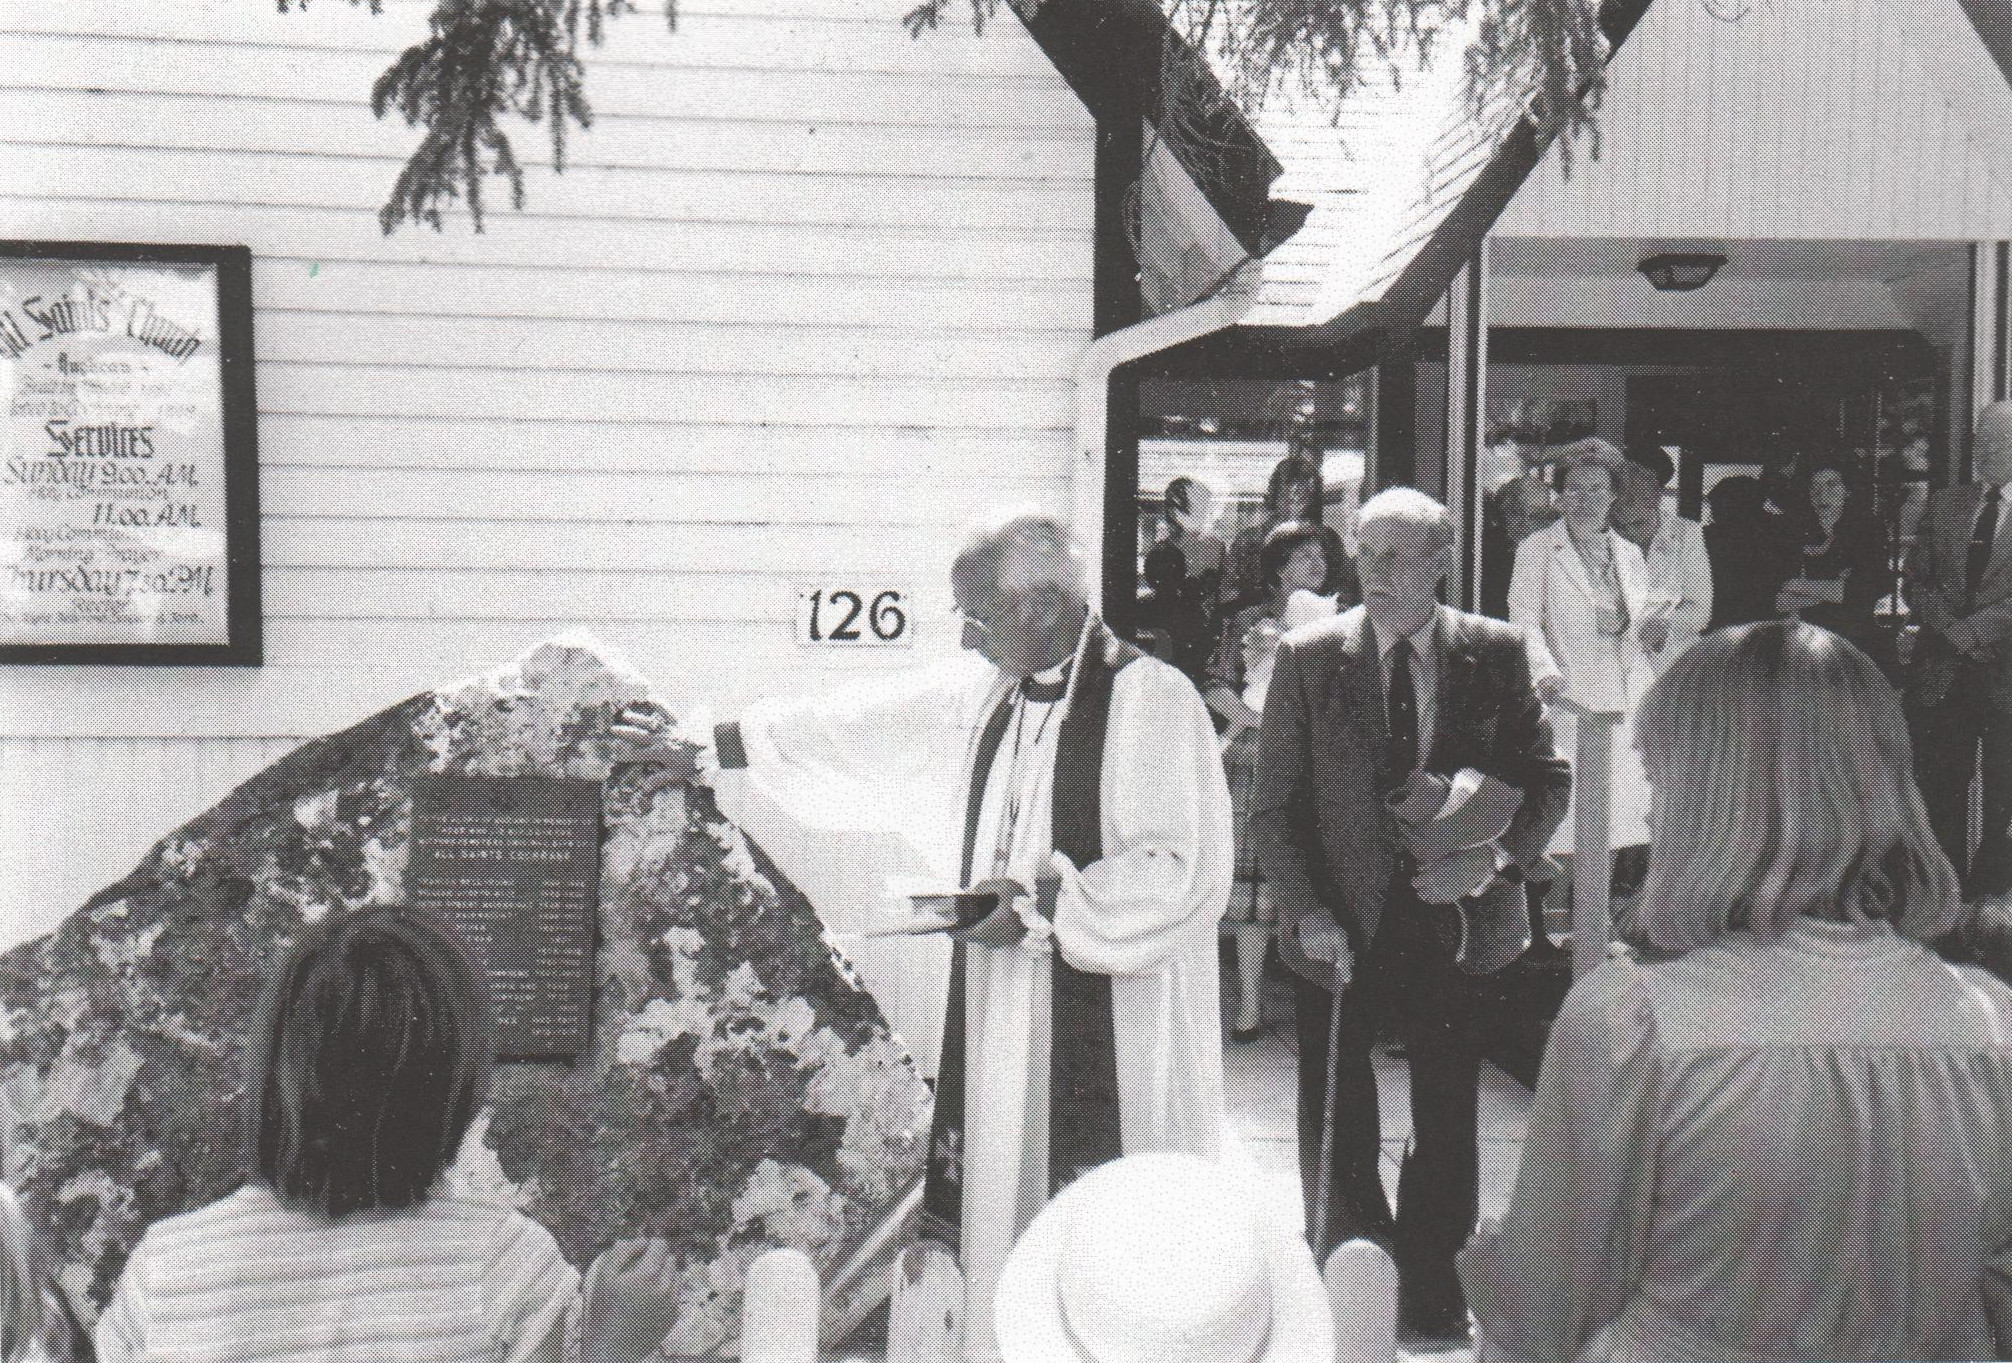 Bishop Ford dedicates the plaque, with Jim Kerfoot looking on.